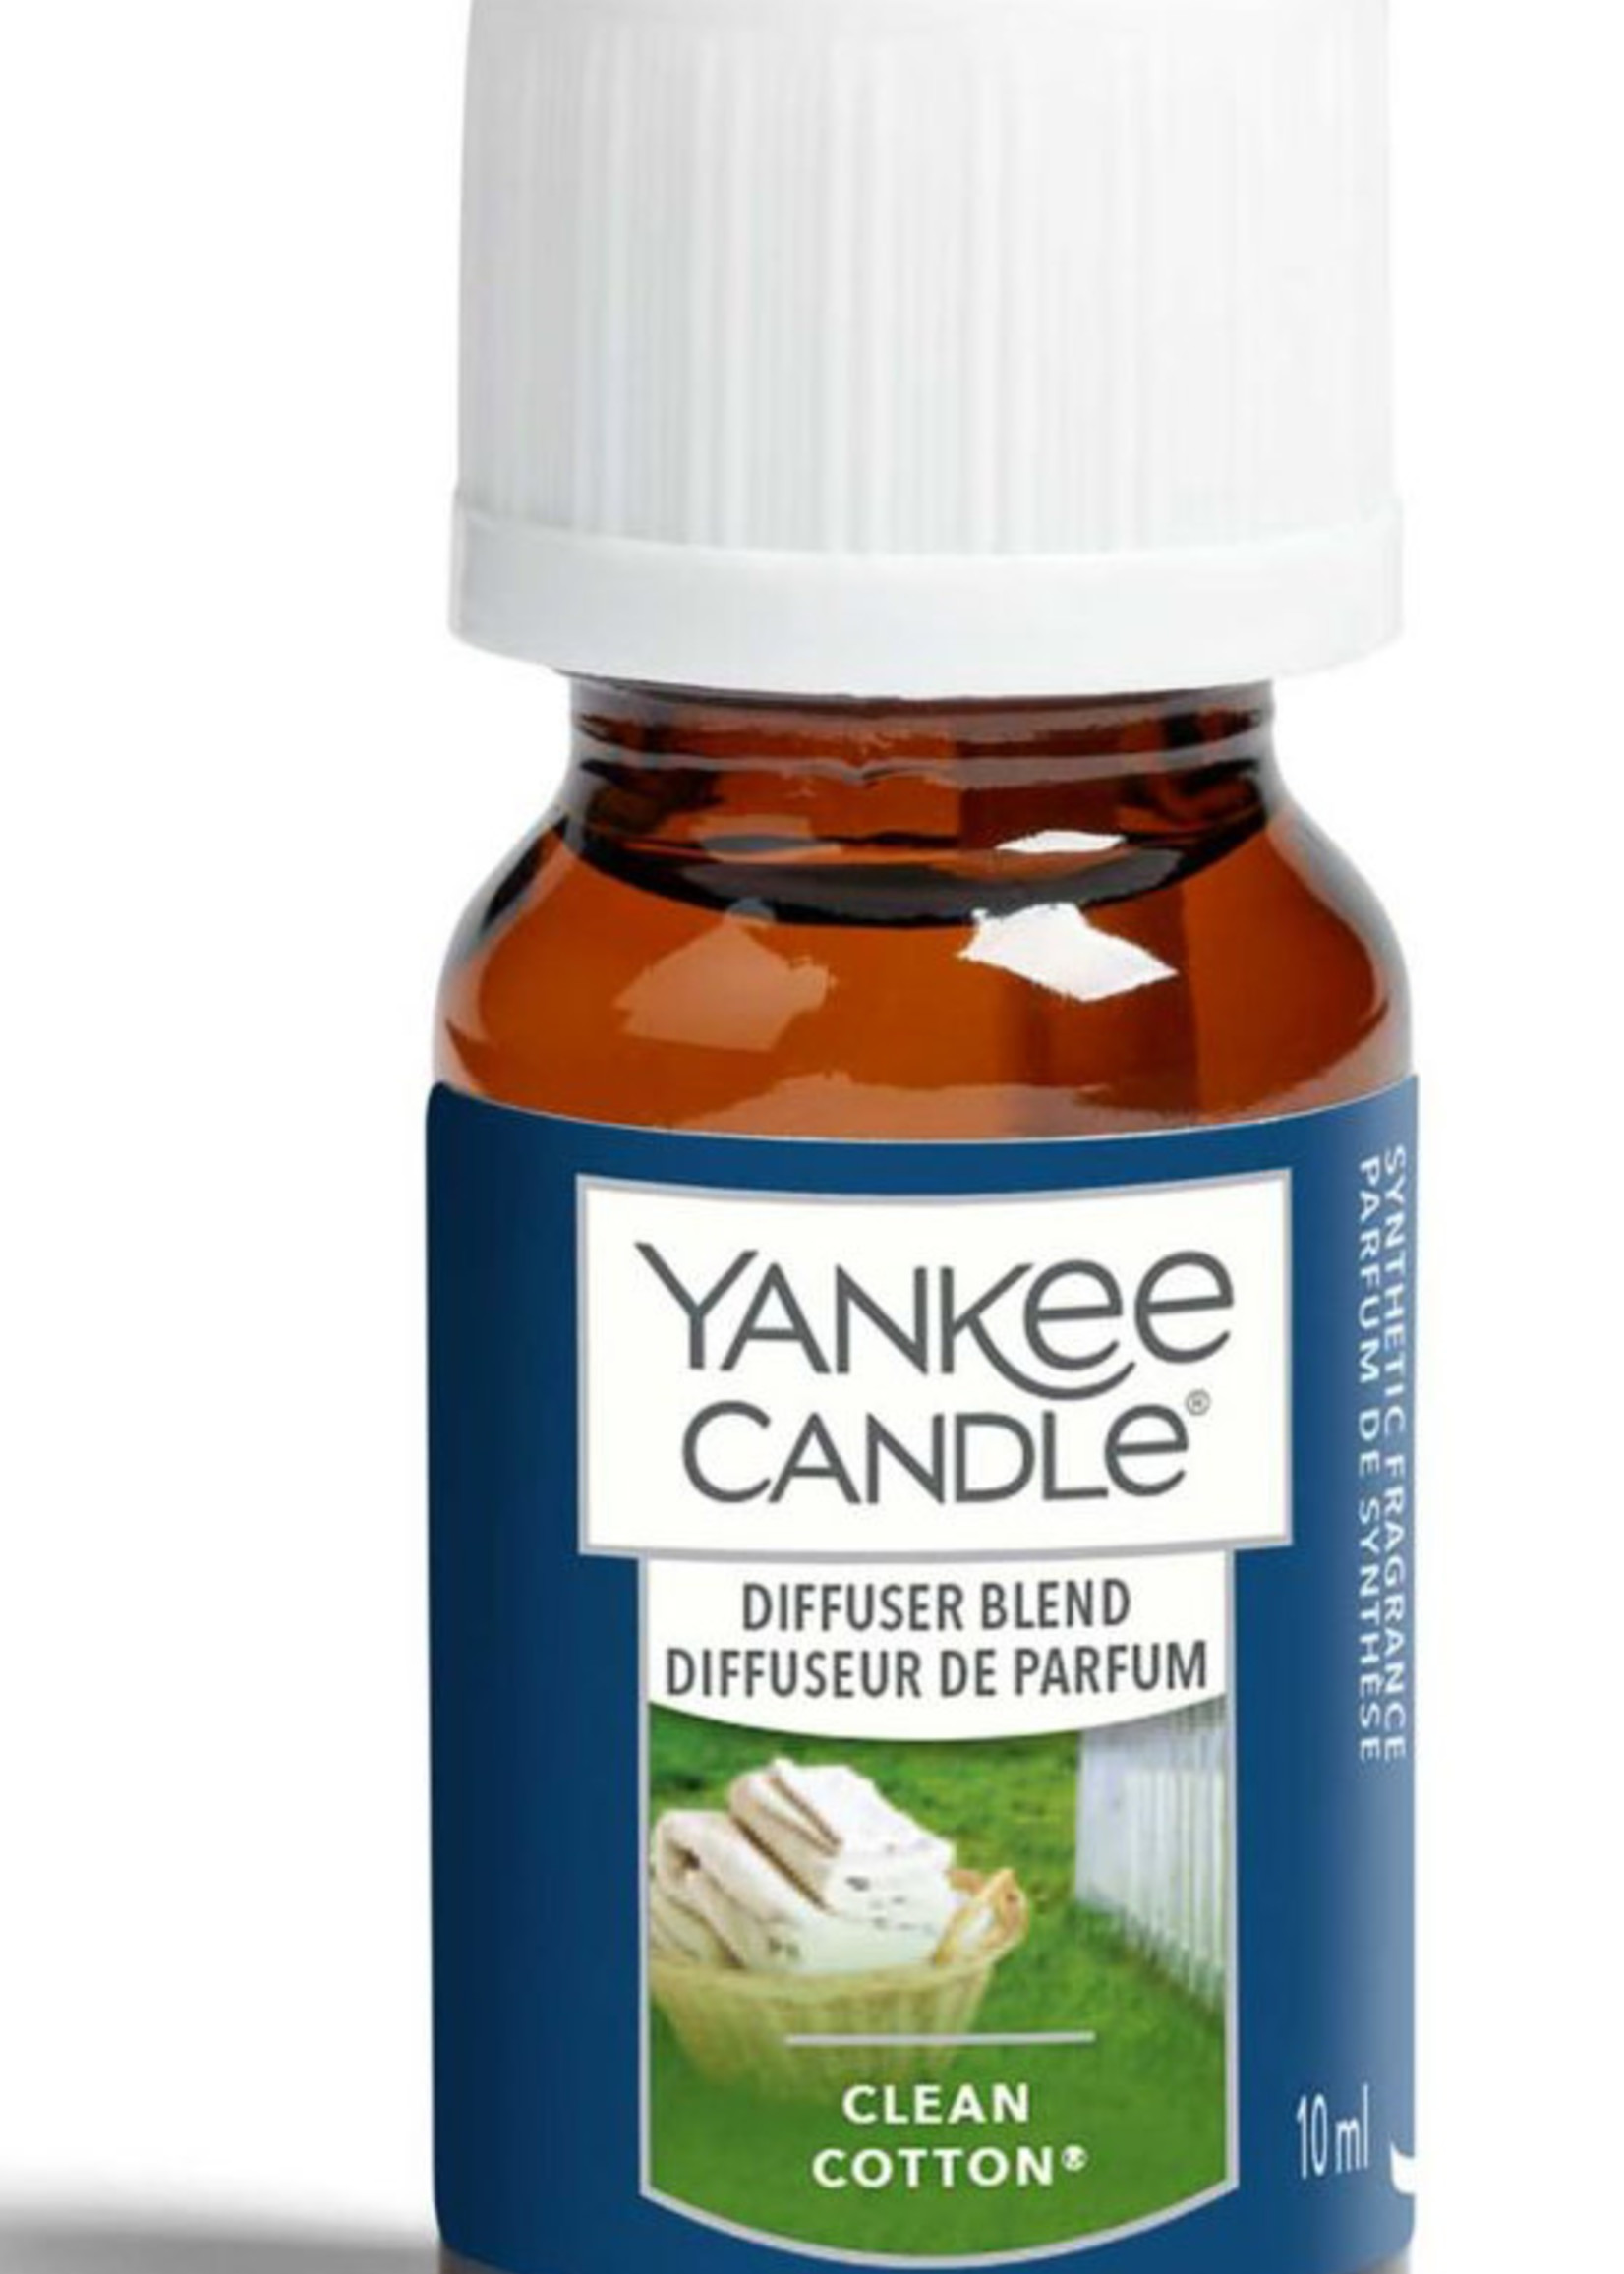 Yankee Candle ScentLight Diffuser Oil Refill, Clean Cotton Fragrance Oil